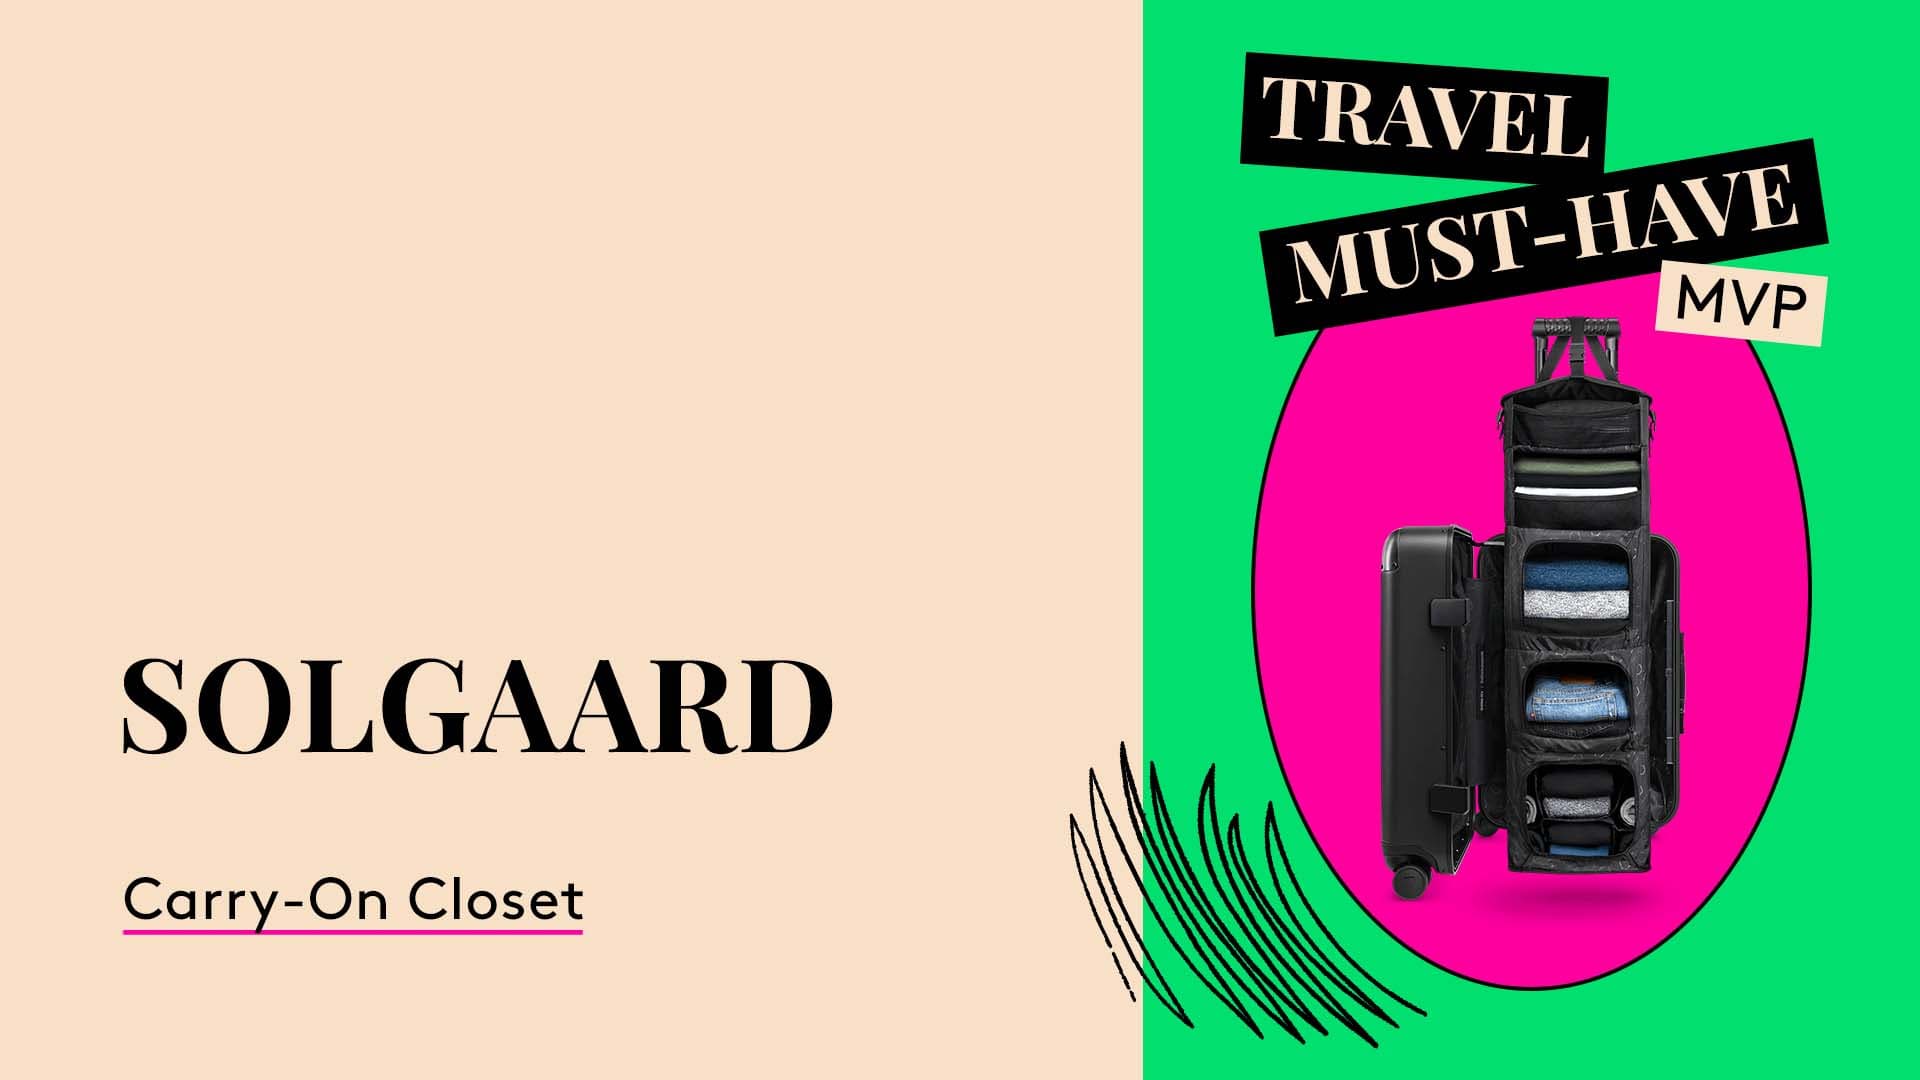 Travel Must-Have MVP. Solgaard Carry-On Closet.